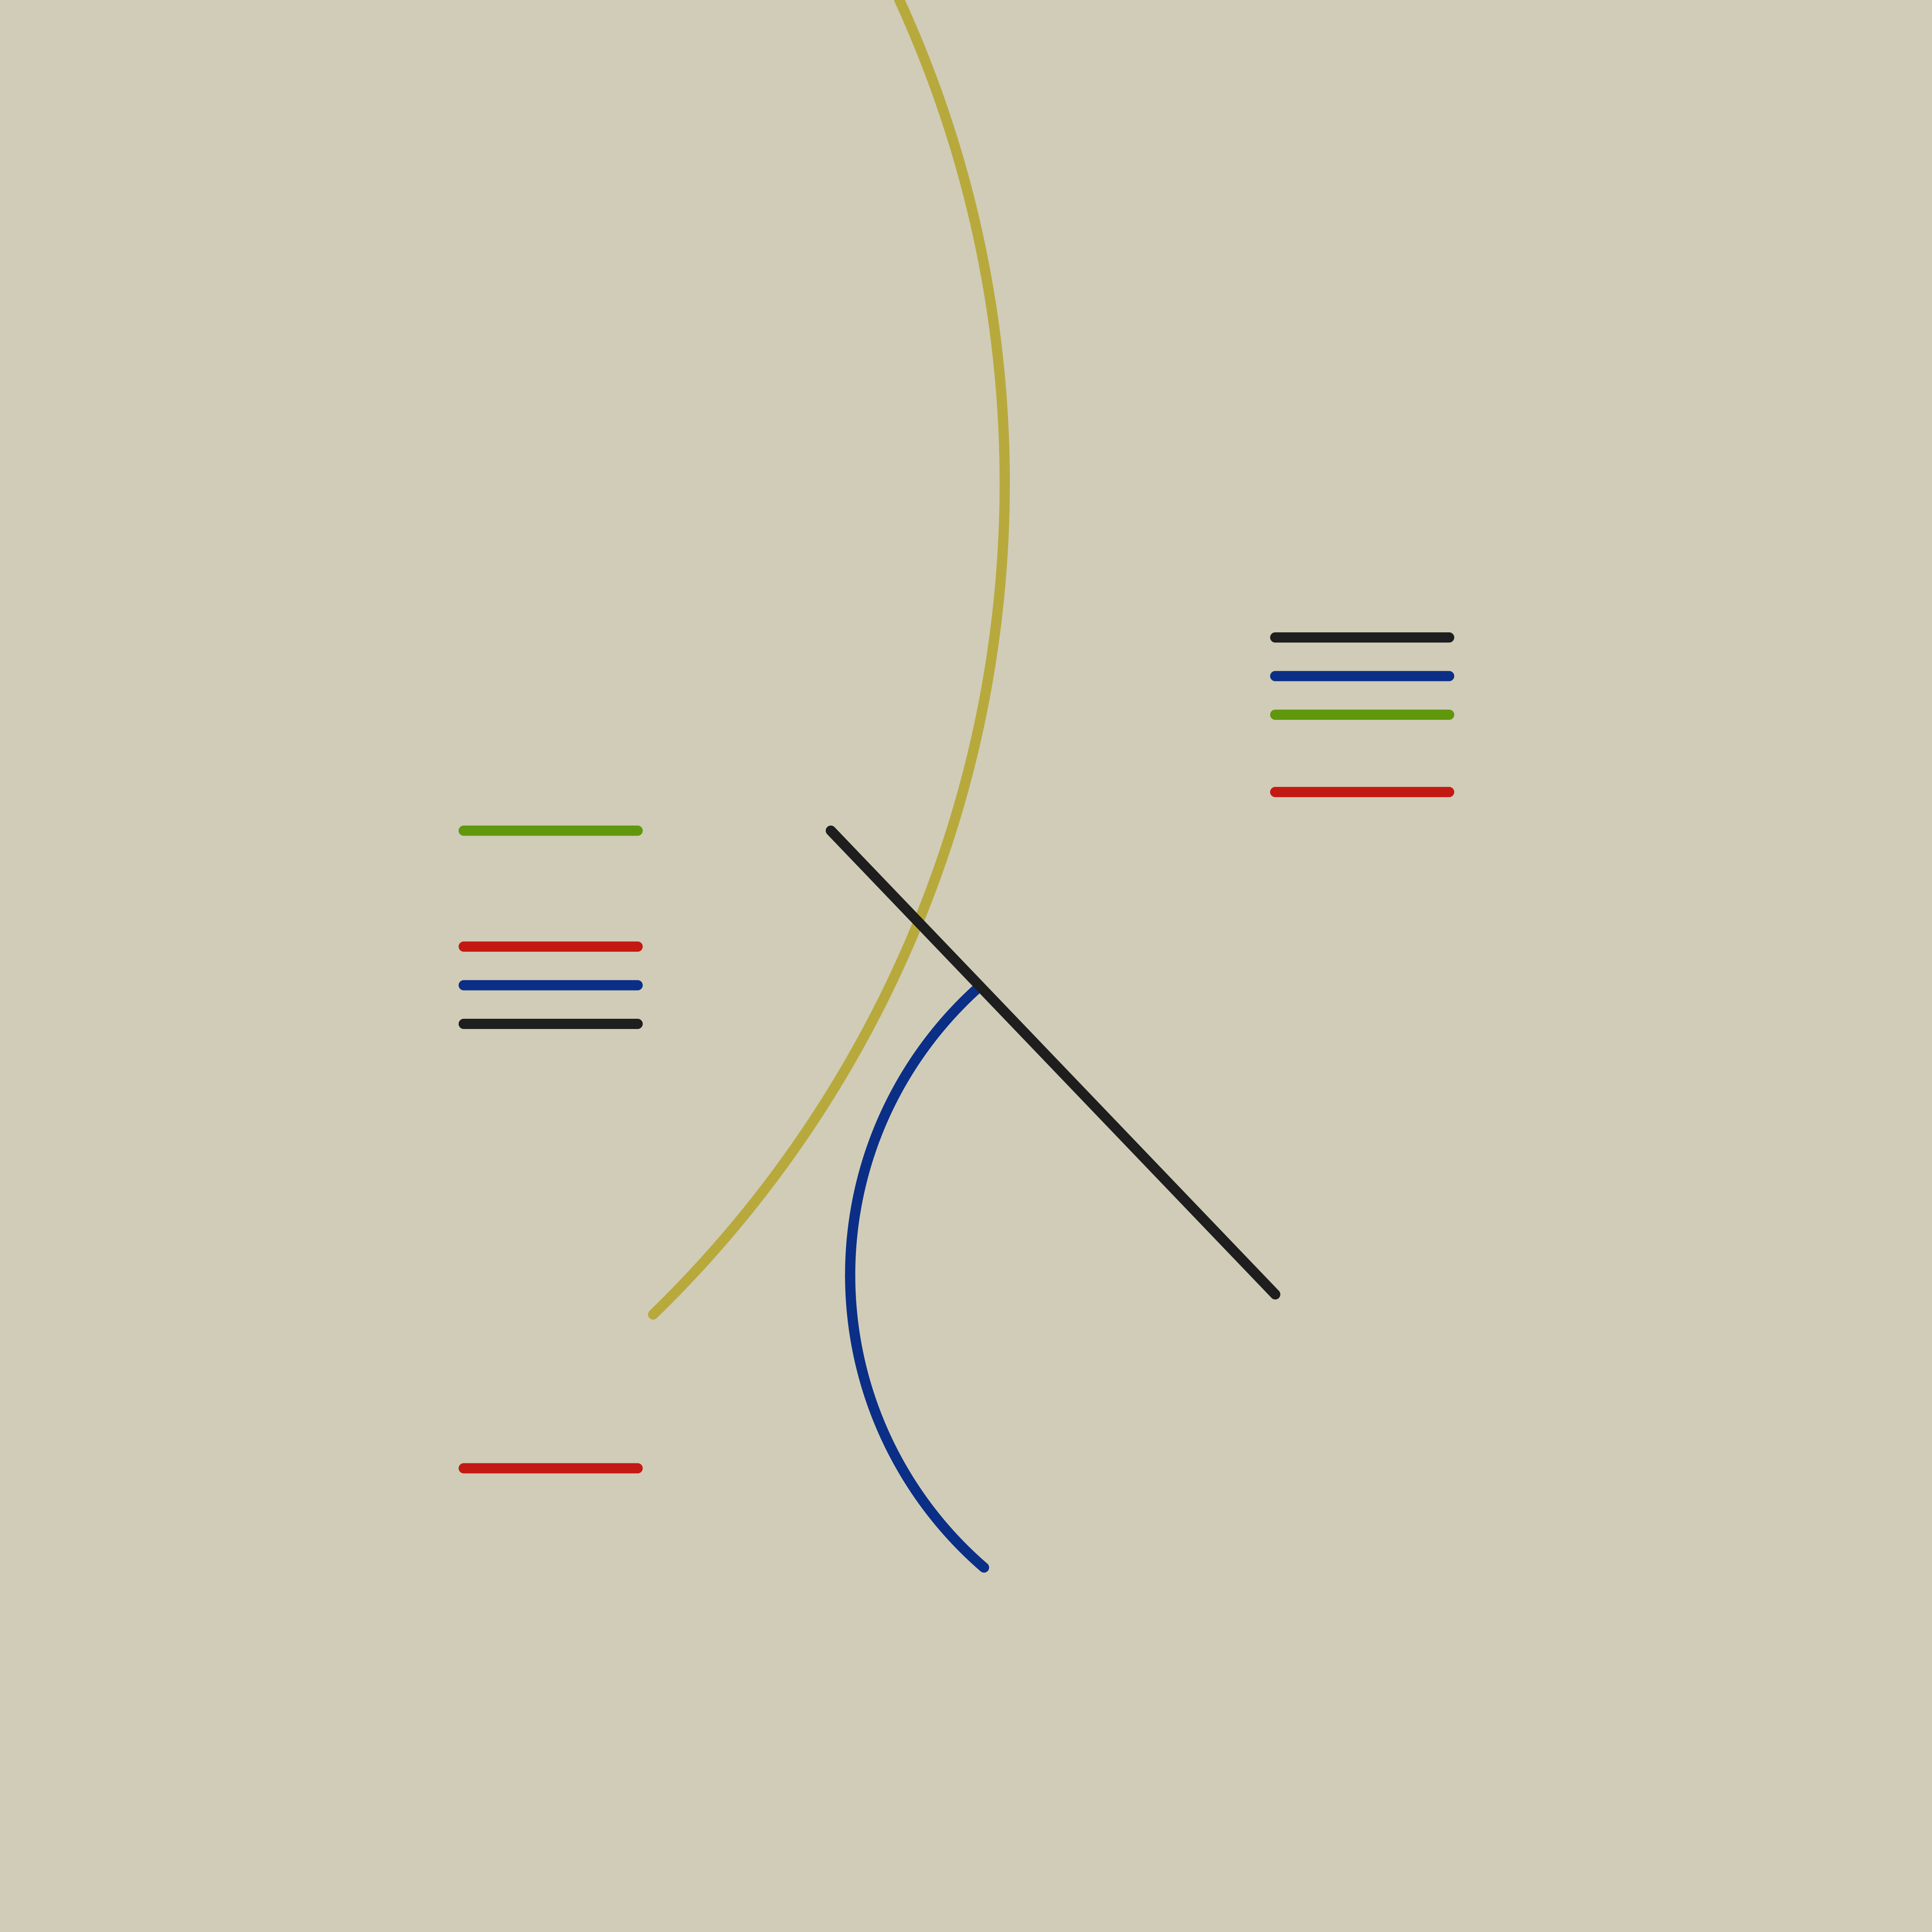 A recreation of Curves and Straight Lines (1948) by Alfred Hlito, which is an oil painting of colorful geometric lines on a cream background. Starting at the top of the painting in the middle there is a dark yellow curve. Intersecting it in the center of the painting is a black line at a 45 degree angle and a dark blue curve. In the top right of the center area there are short horizontal black blue green and red lines. In the top left of the center area are horizontal green red blue and black lines. In the bottom left of the center there is a short horizontal red line.